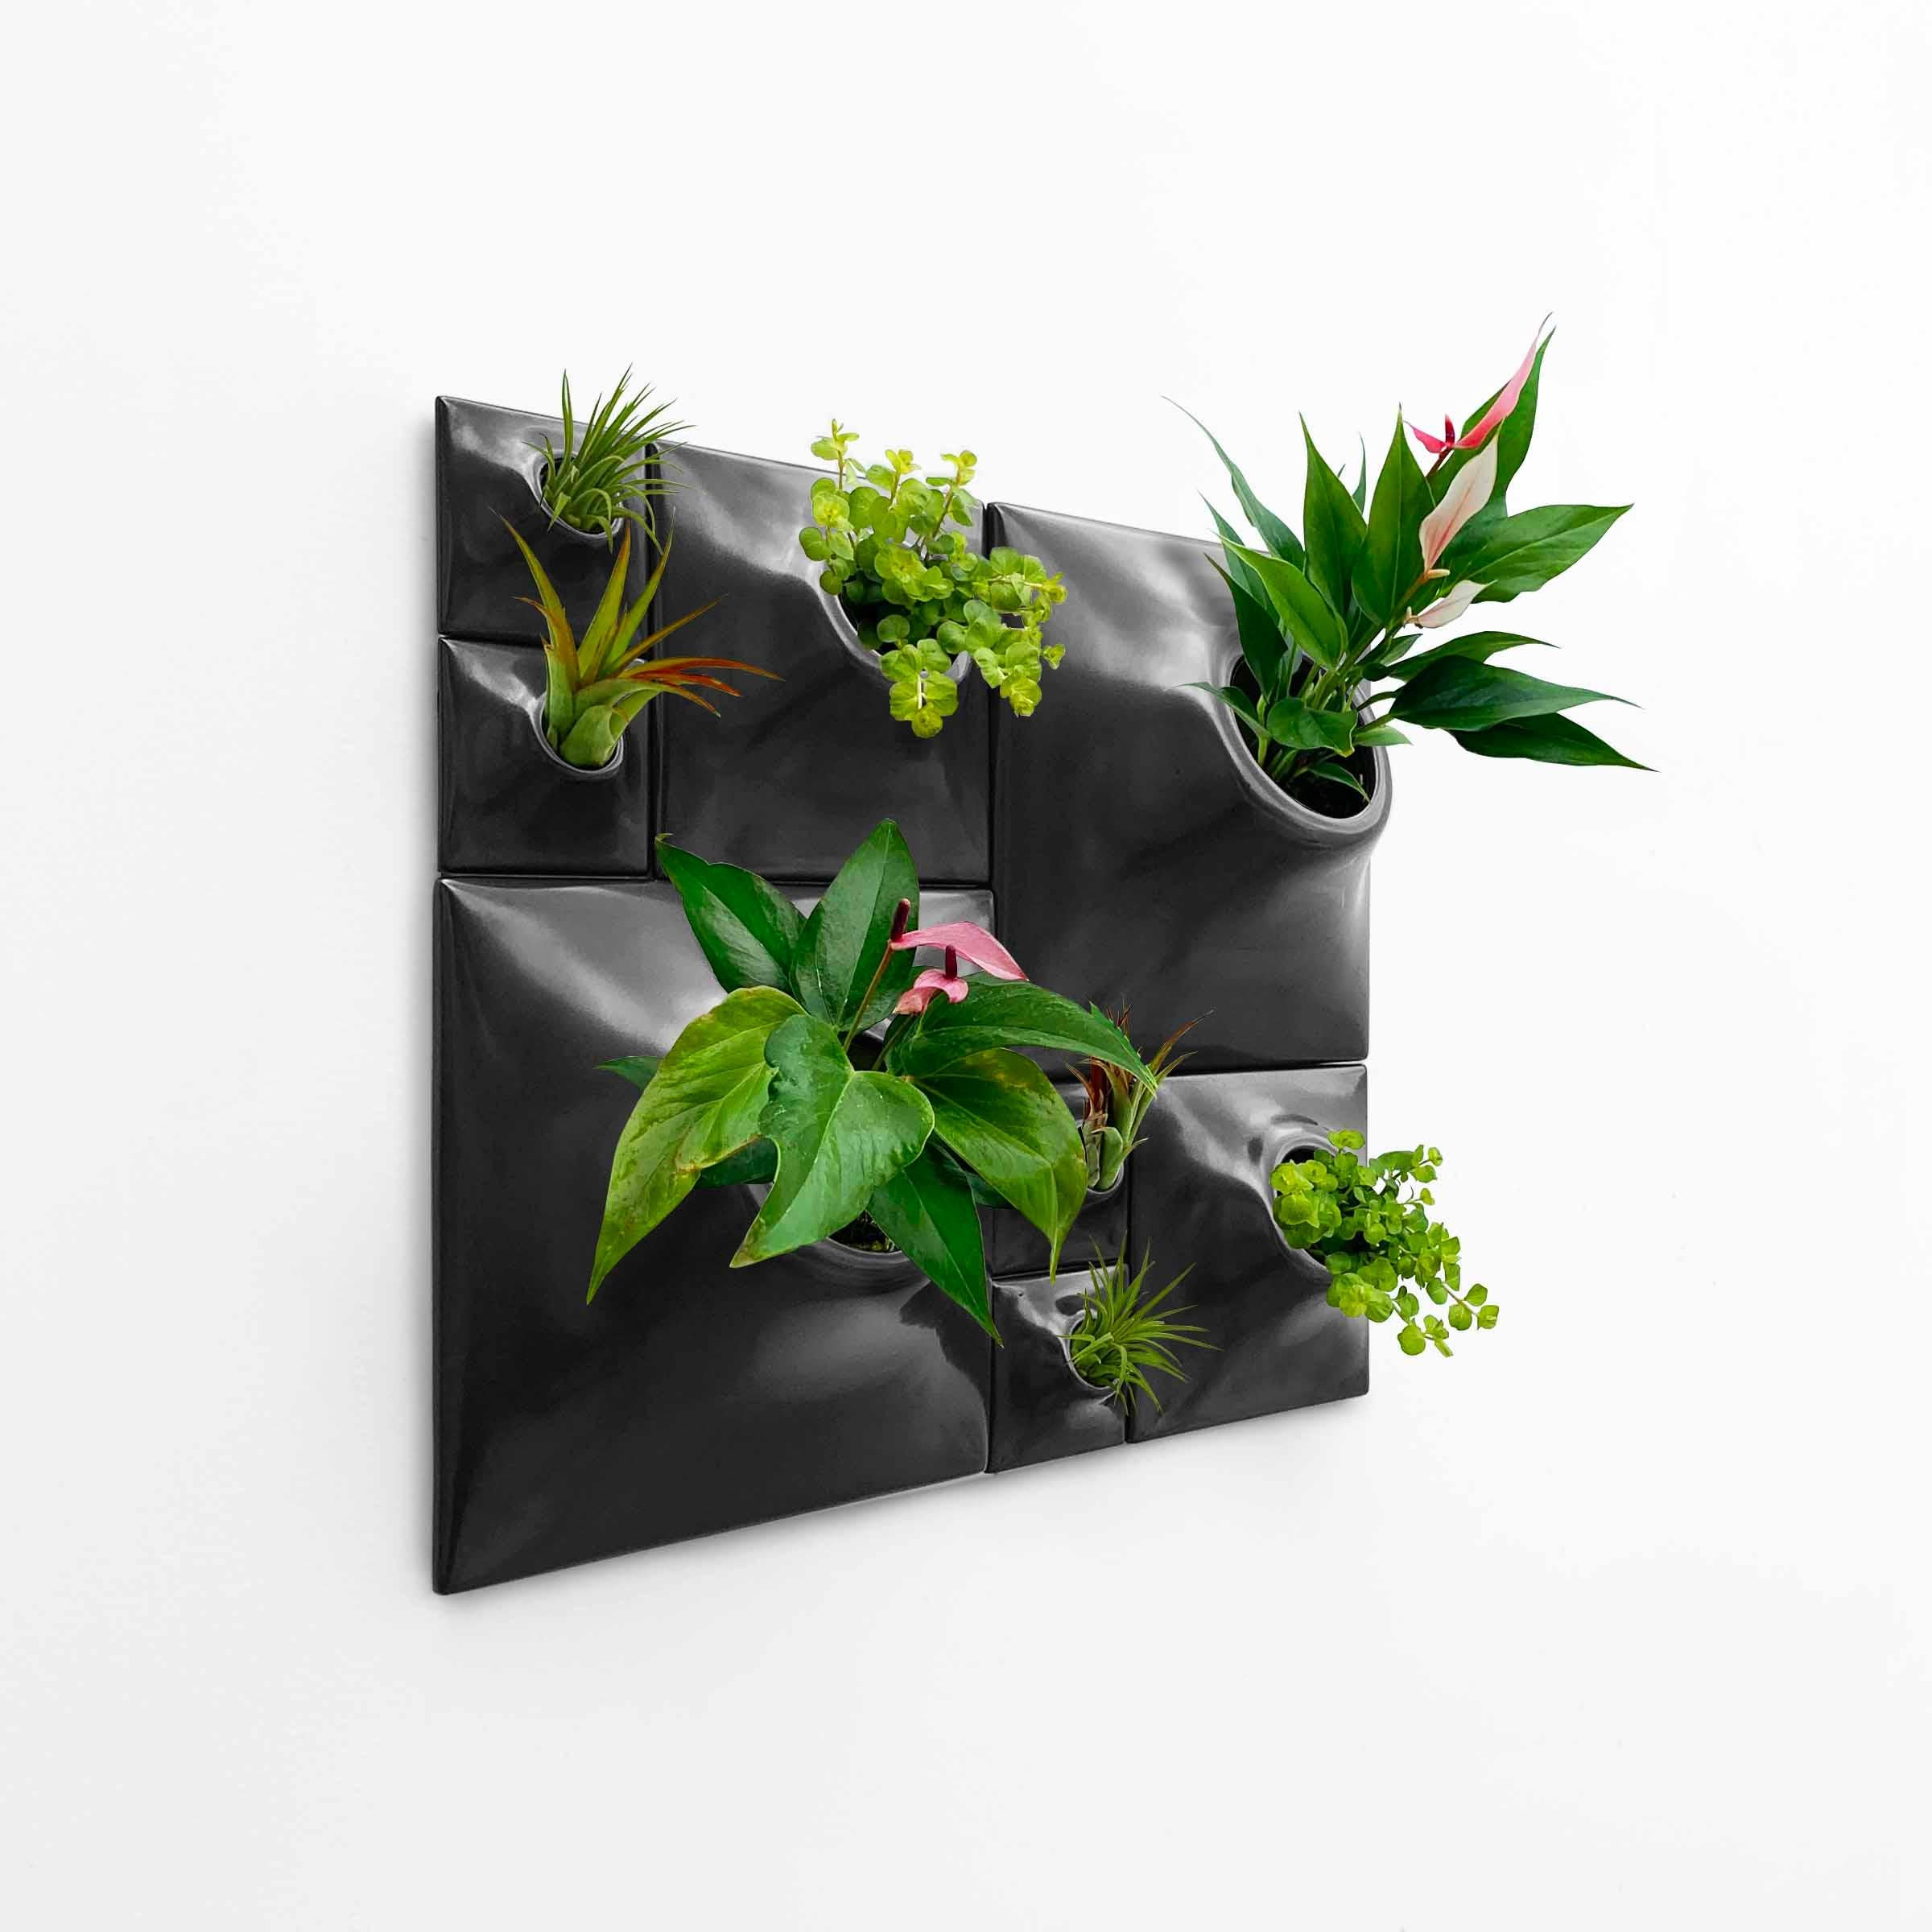 Modern Black Wall Planter Set, Greenwall Sculpture, Living Wall Decor, Node BS2

Reimagine your wall art as an awe-inspiring sculptural plant wall or moss wall in your modern home with this breathtaking Node Wall Planter set. Take your eyes on a